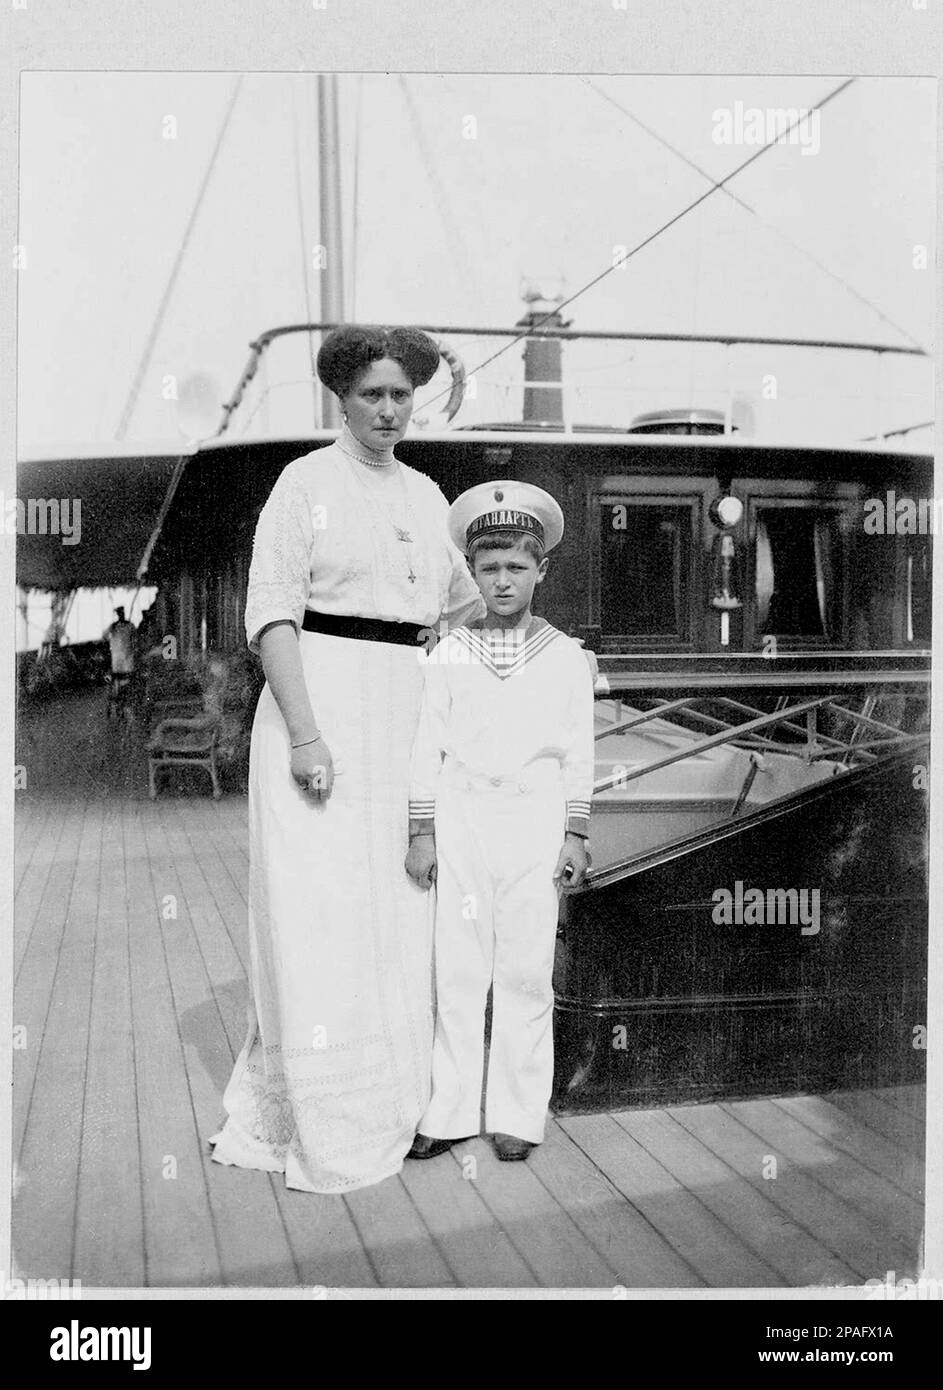 The russian crownprince Grand Duke Tsarevich ALEXEI Nikolaevich ROMANOV (1904 - 1918 ) with mother ALEXANDRA , born Princess Alix of Hesse and by Rhine ( 1872 - 1918 ).  The the youngest child and the only son of Tsar Nicholas II of Russia and Alexandra Fyodorovna .  His mother's reliance on the starets Grigori Rasputin to treat Alexei's haemophilia helped bring about the end of Imperial Russia. His murder following the Russian Revolution of 1917 resulted in his canonization as a passion bearer of the Russian Orthodox Church. He was two weeks shy of his fourteenth birthday when he was murdered Stock Photo